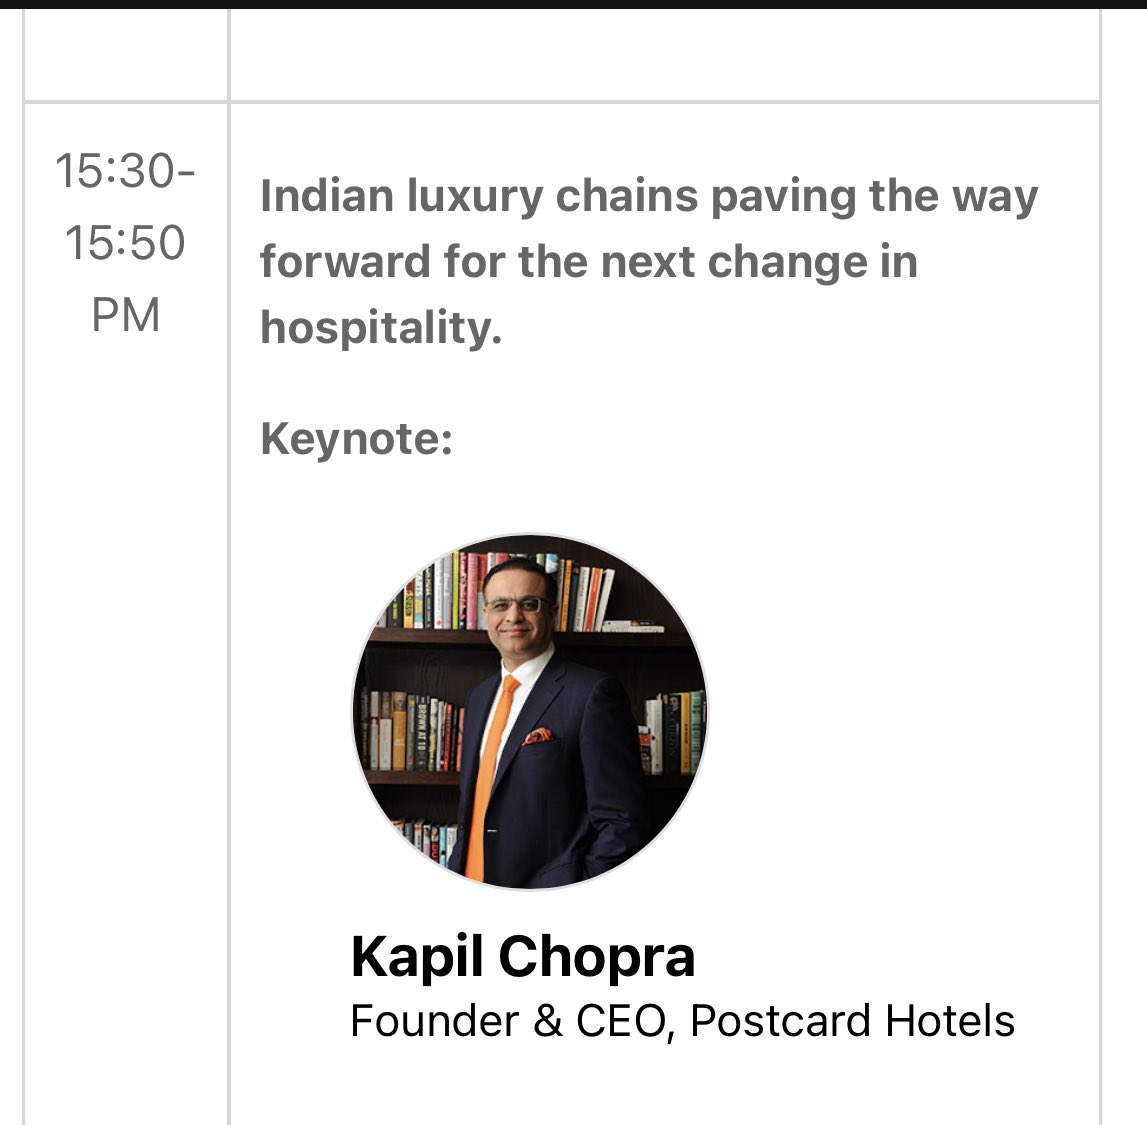 Speaking today at the India Investment Forum at the @EntrepreneurIND in Mumbai. Let’s talk luxury hotels, let’s talk about the @PostcardHotel and why we are trying to build the best hotels in the world out of India.